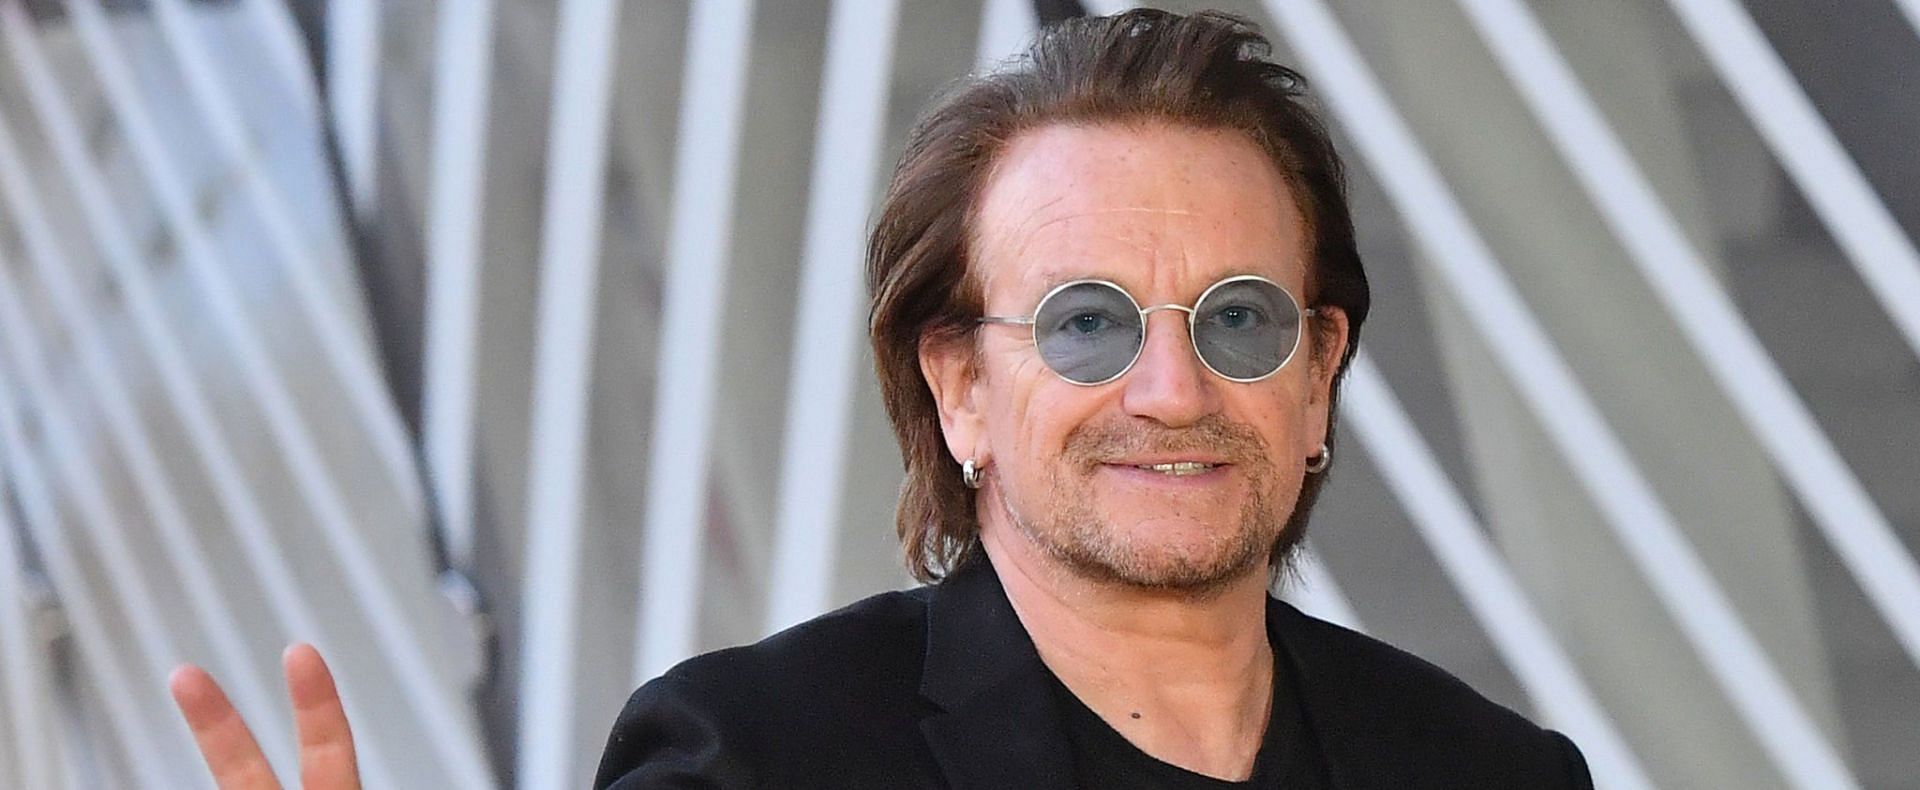 Bono trended on social media after attending State of the Union address (Image via Getty Images)